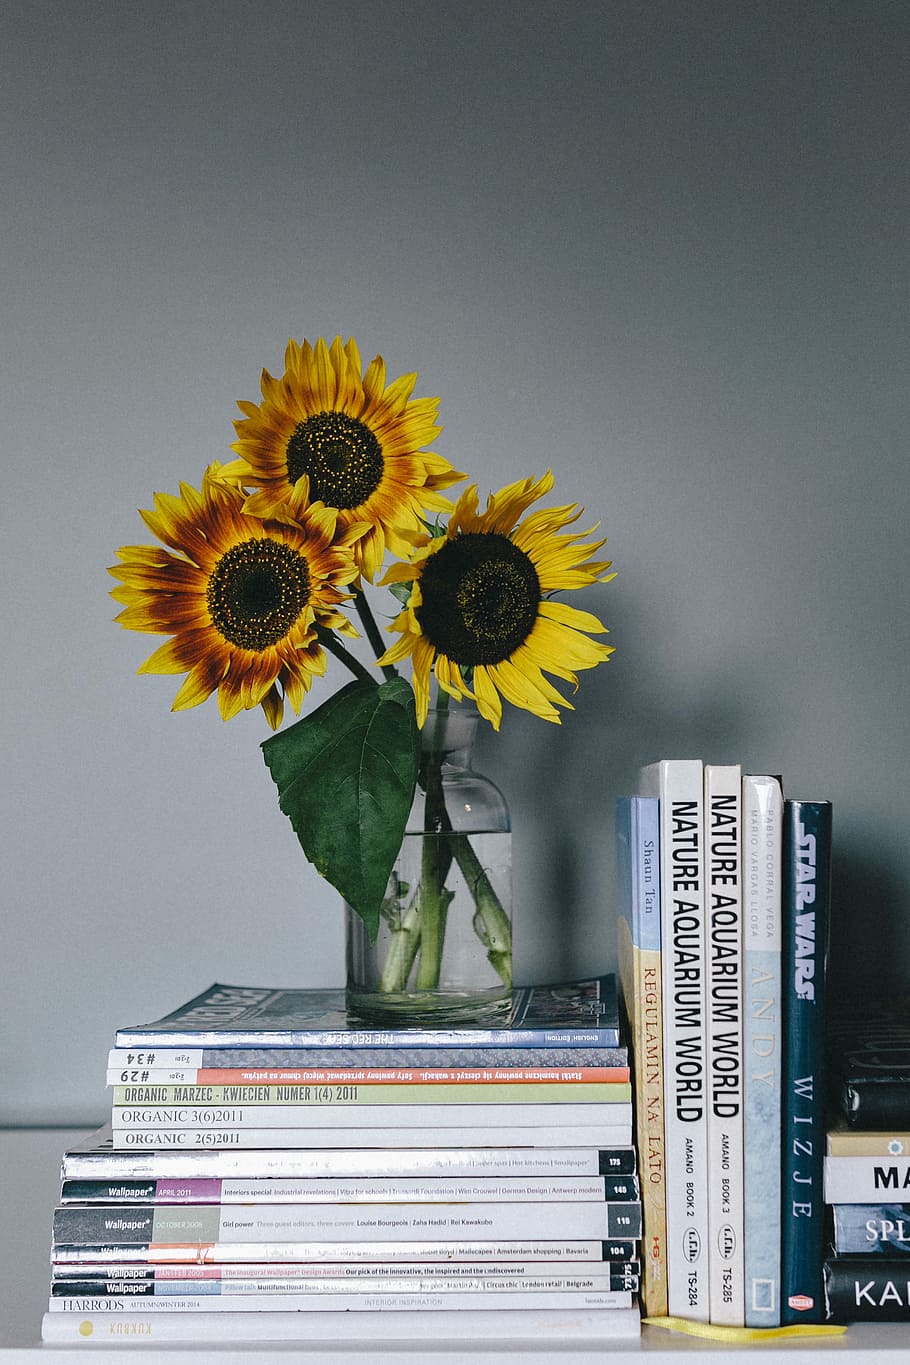 A vase of sunflowers on top of a stack of books - Sunflower